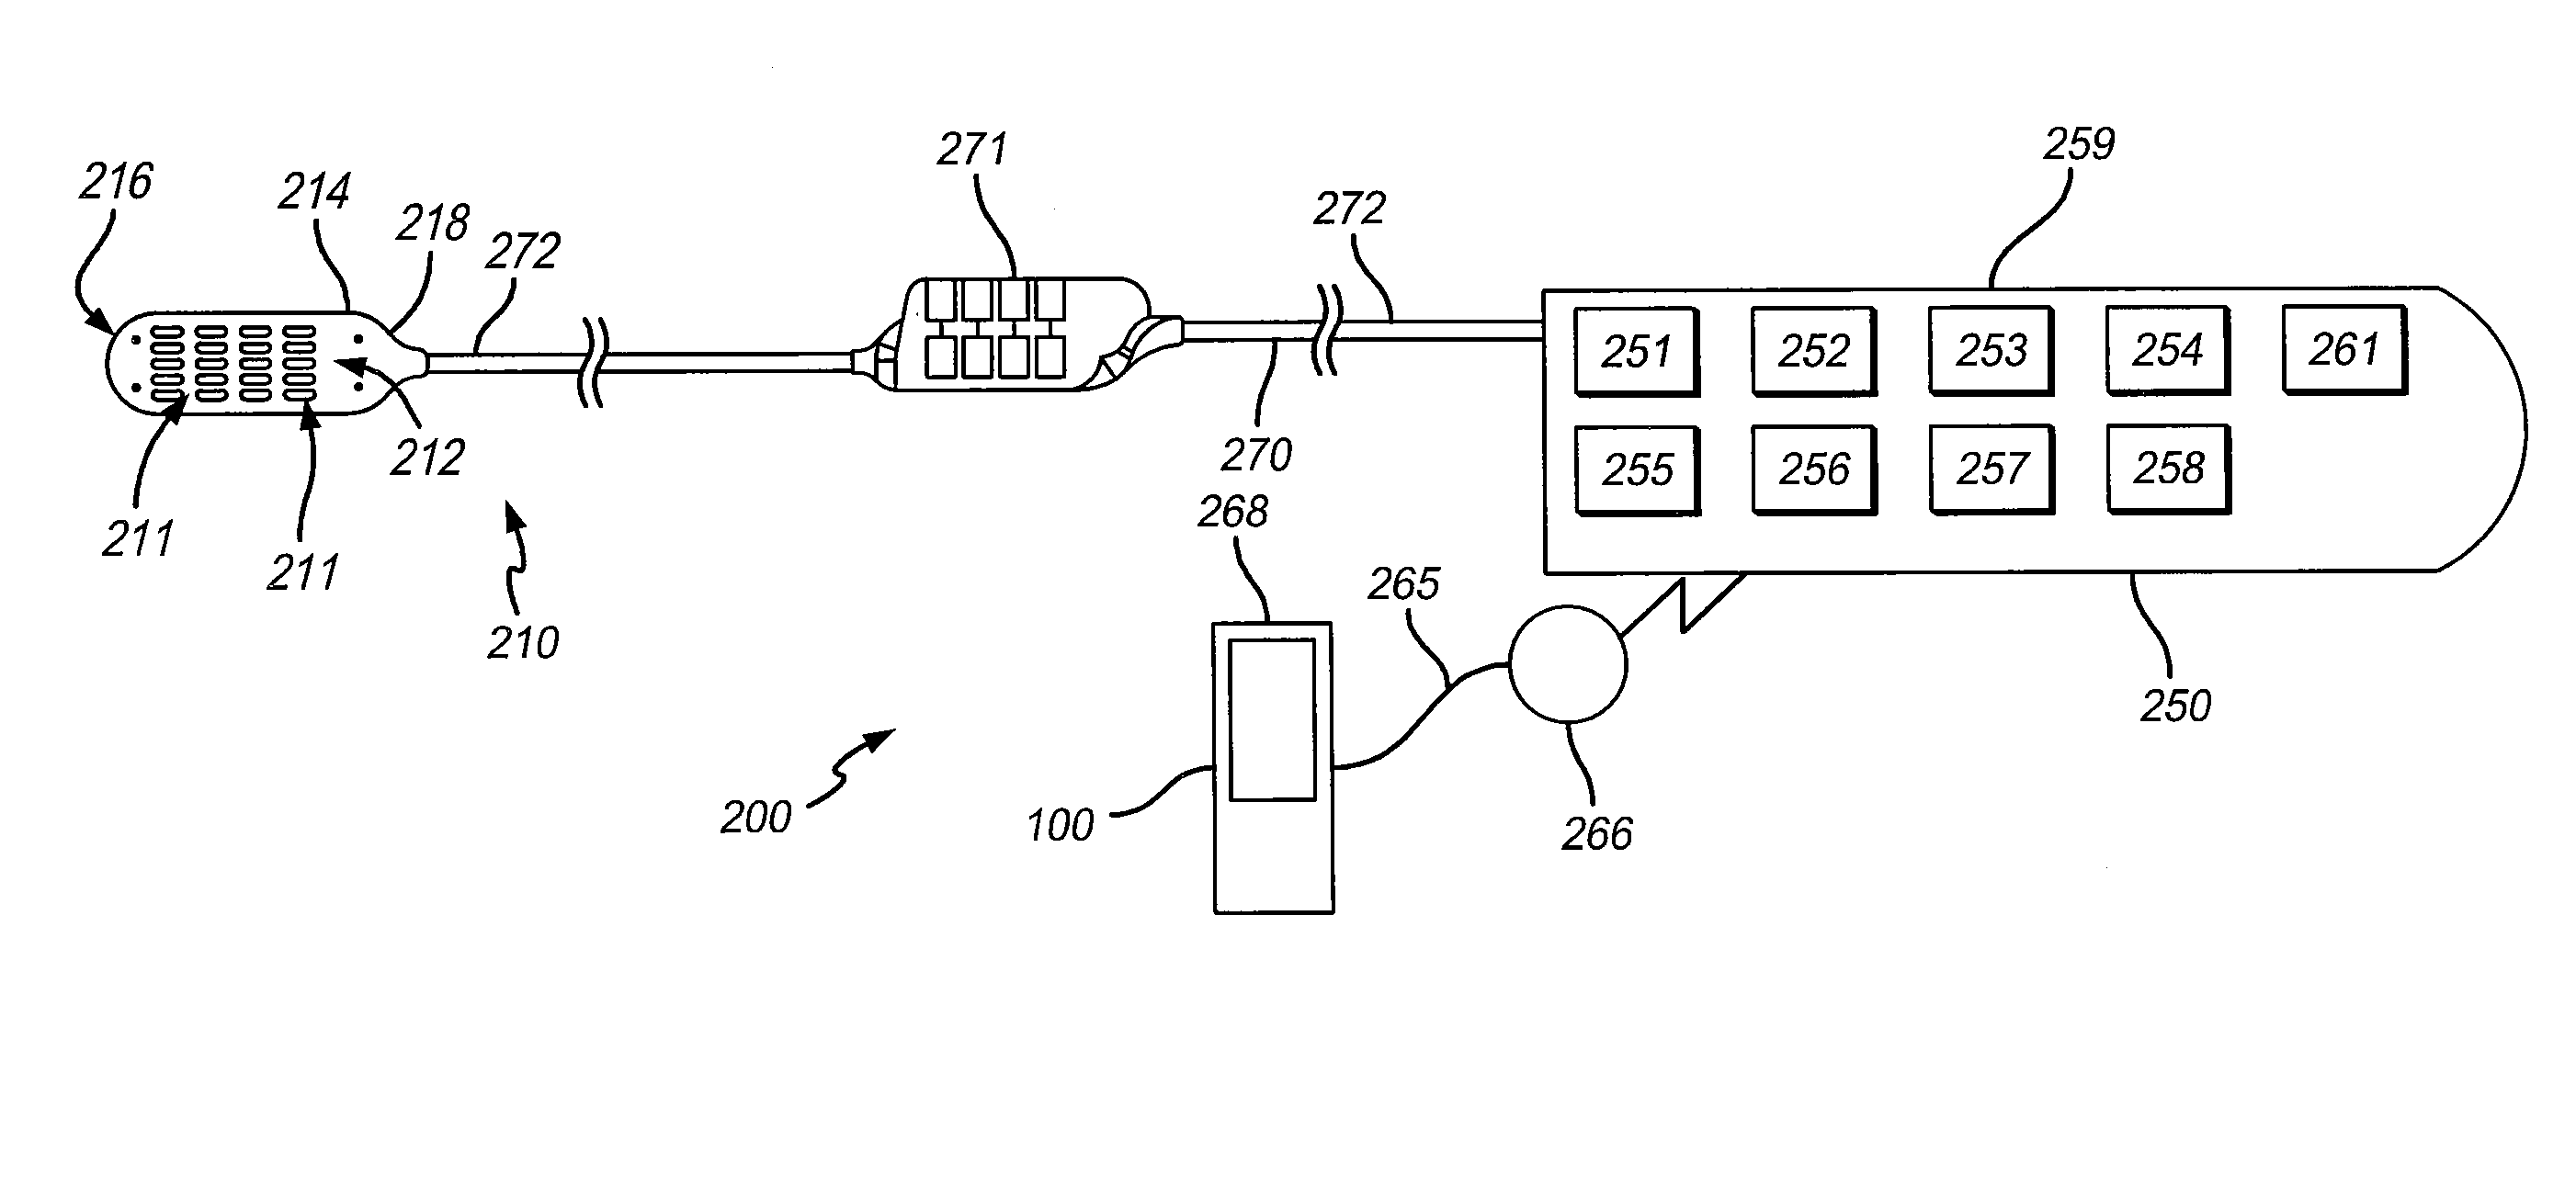 Spinal cord stimulation guidance system and method of use